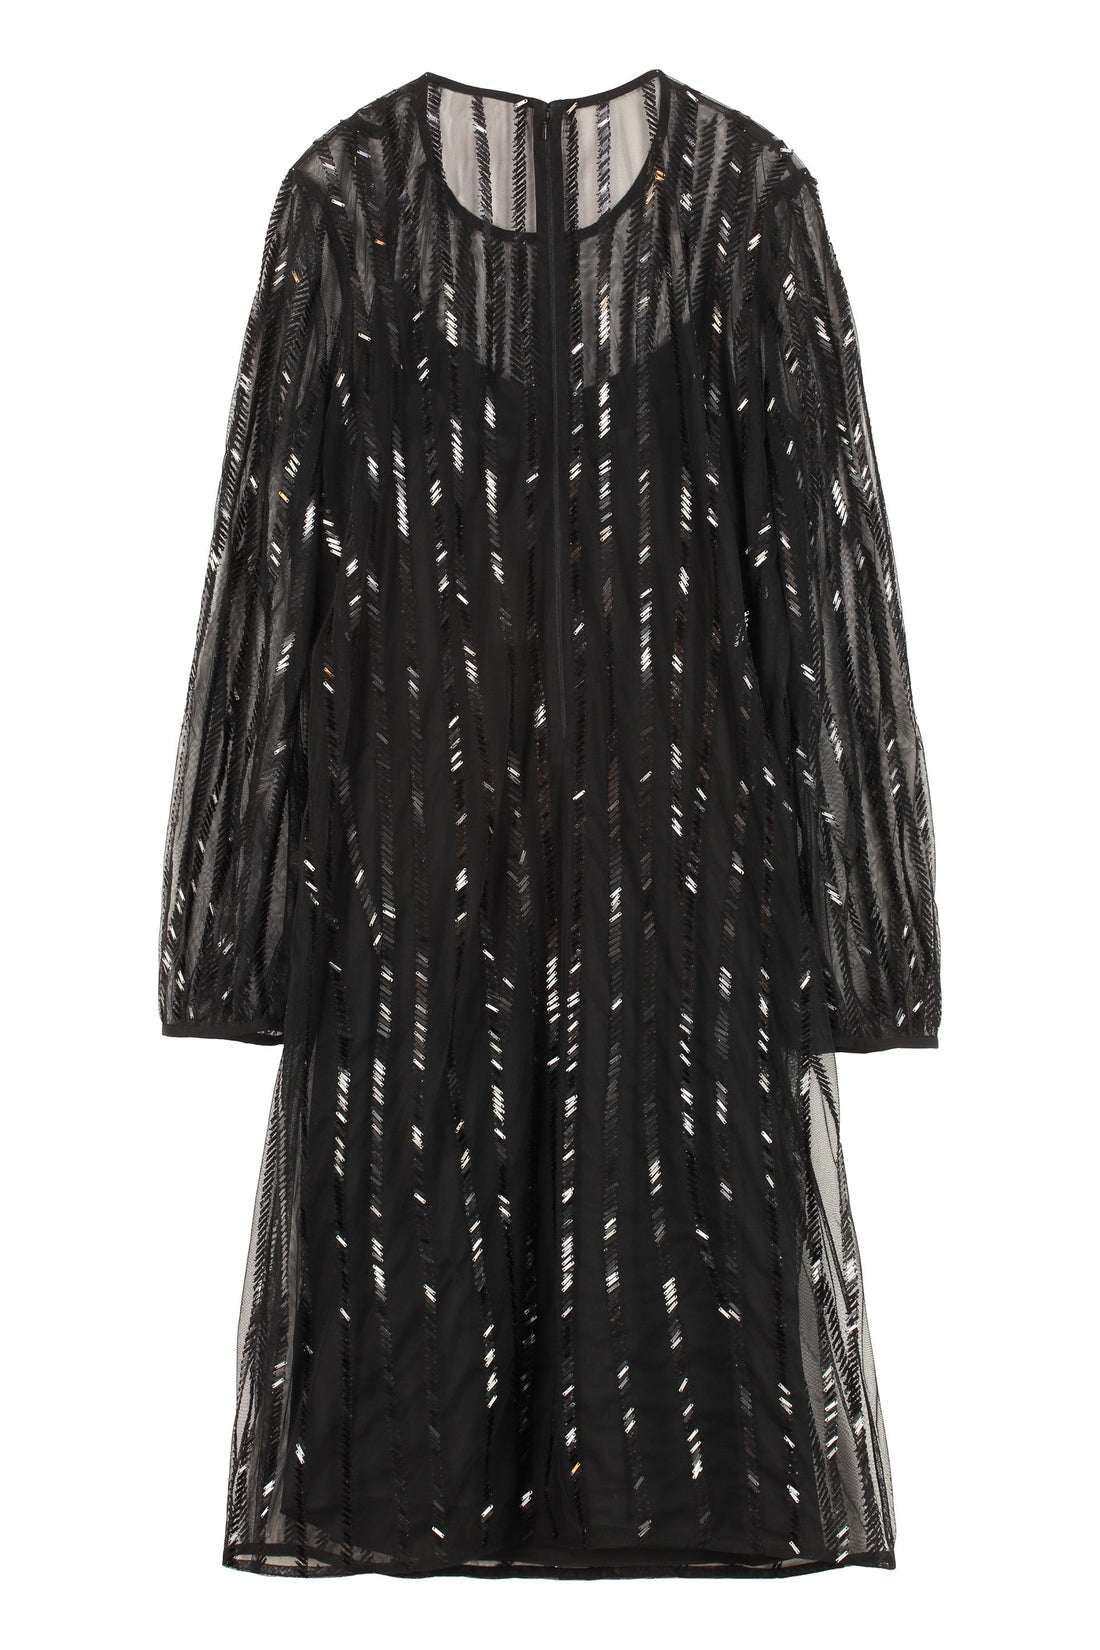 Max Mara Studio-OUTLET-SALE-Zorro sequins embroidery tulle dress-ARCHIVIST